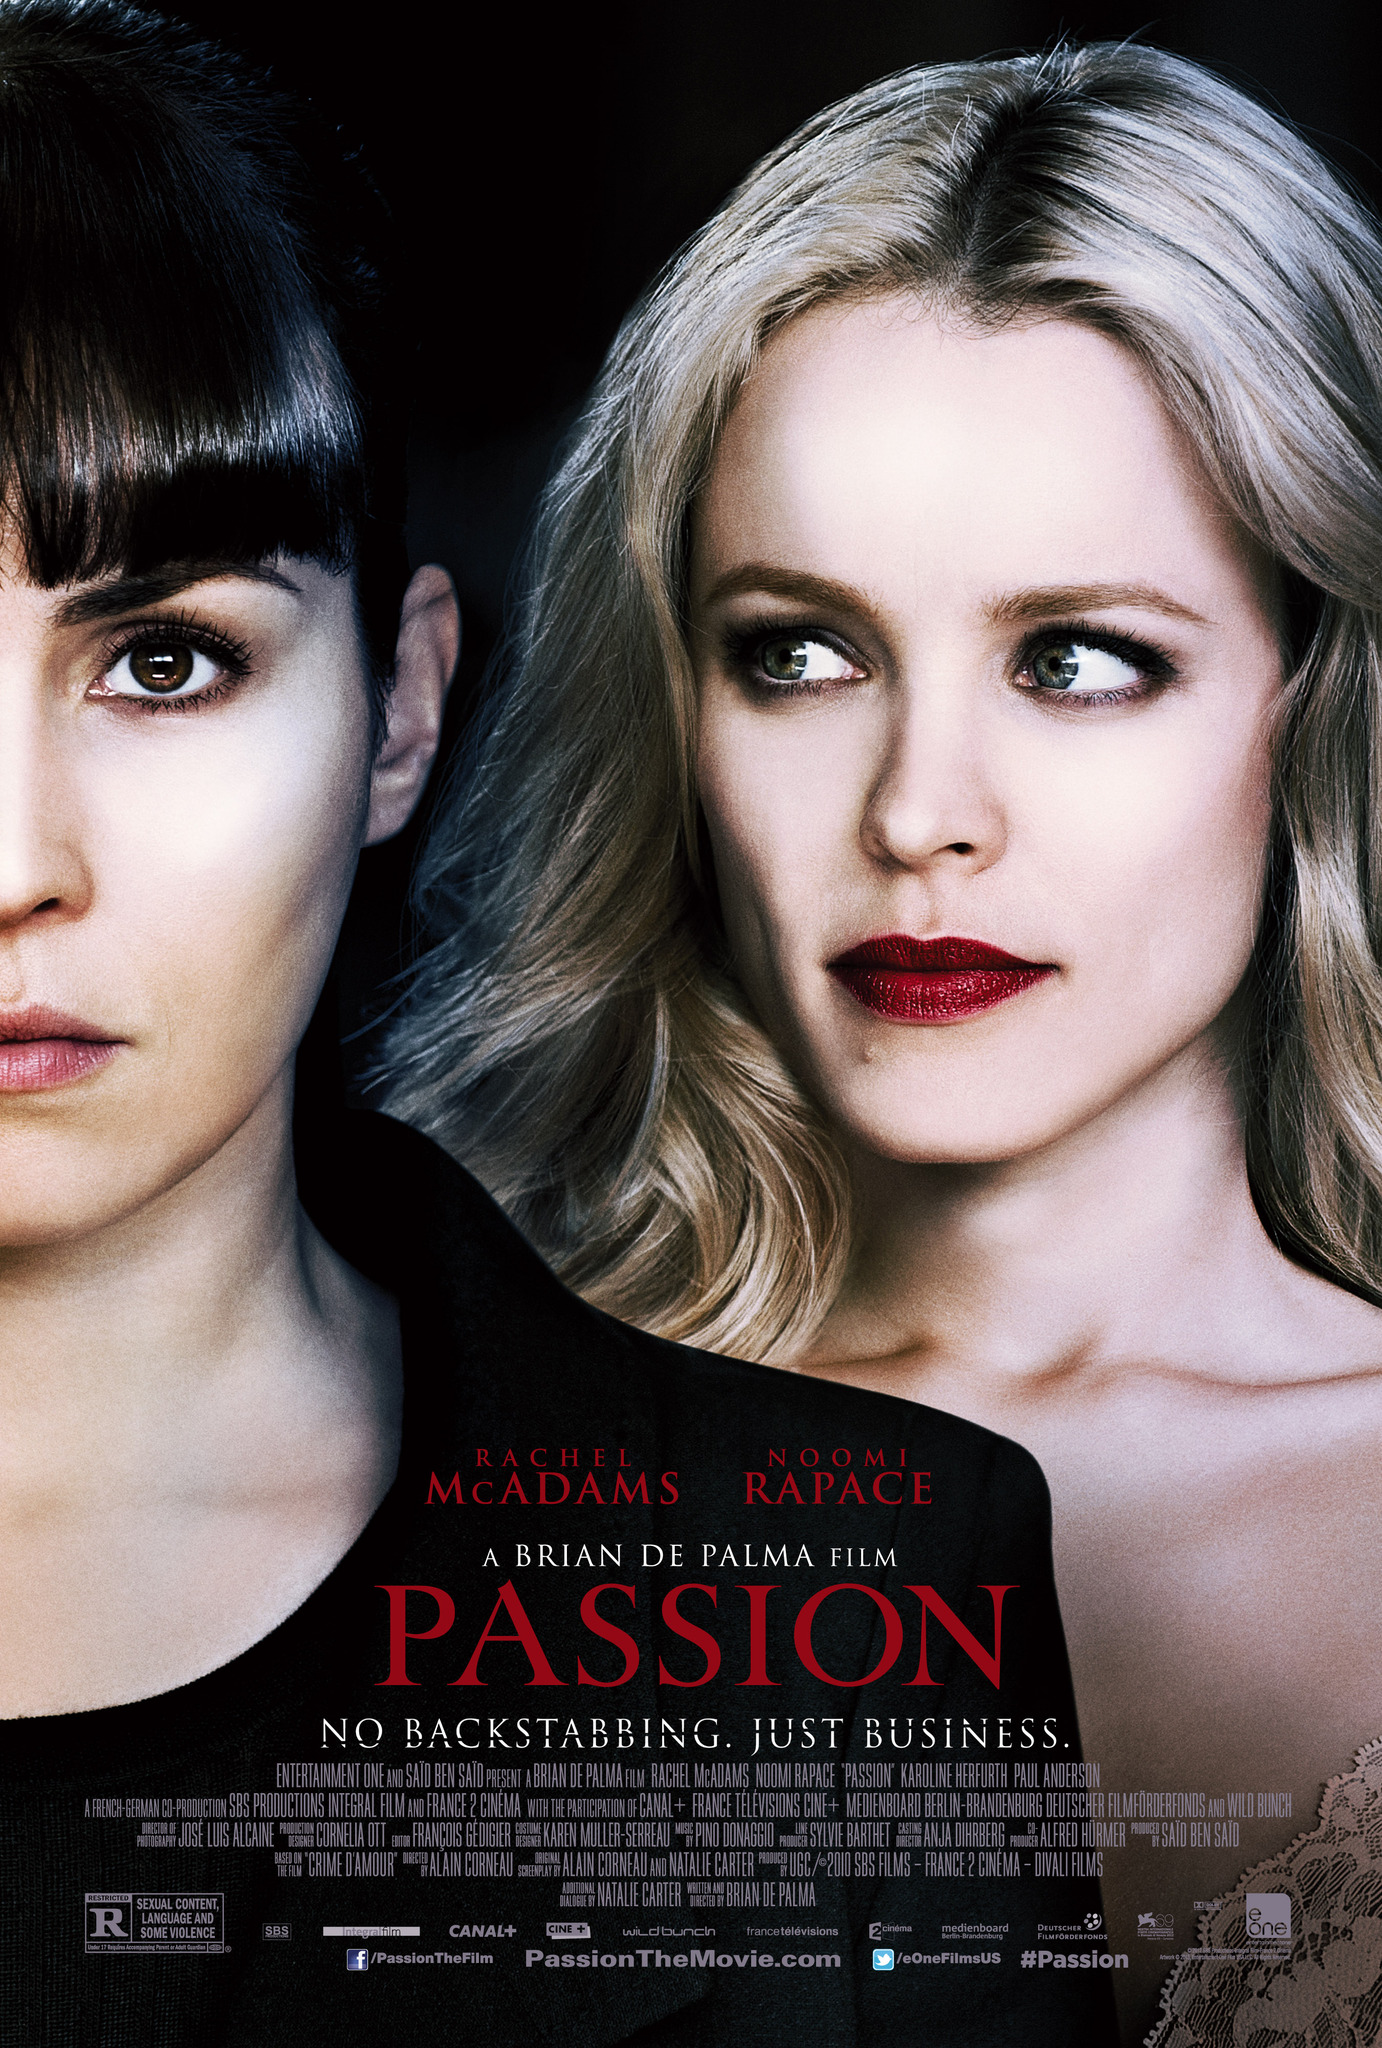 Noomi Rapace and Rachel McAdams in Passion (2012)